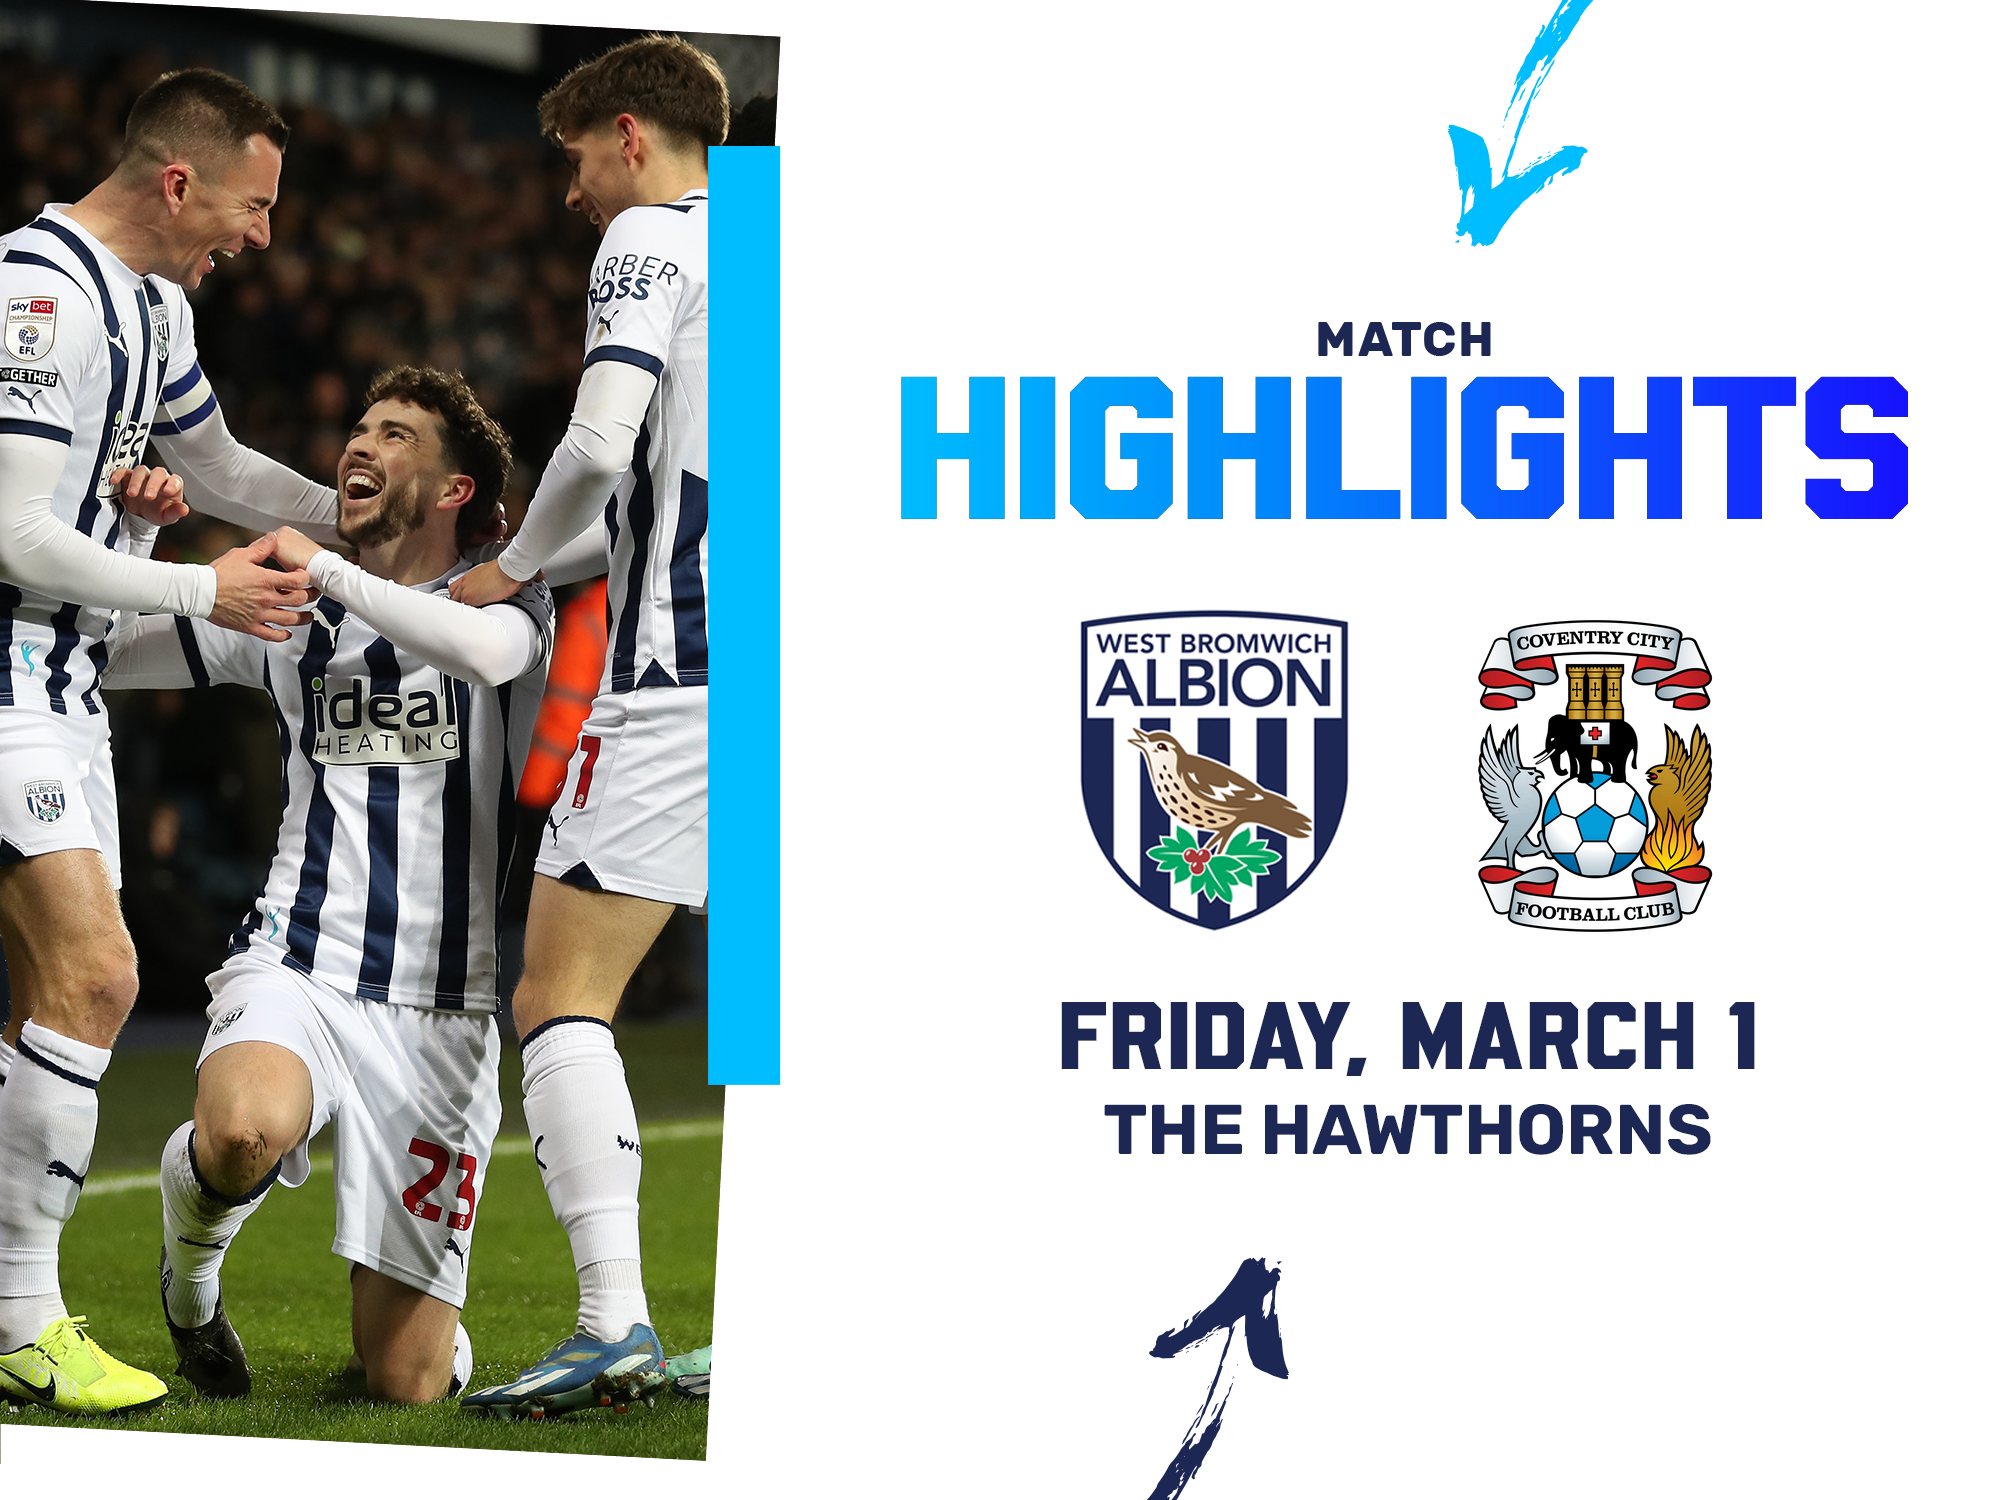 A photo highlights graphic, showing the club crests of Albion and Coventry City, with a picture of Mikey Johnston celebrating at The Hawthorns